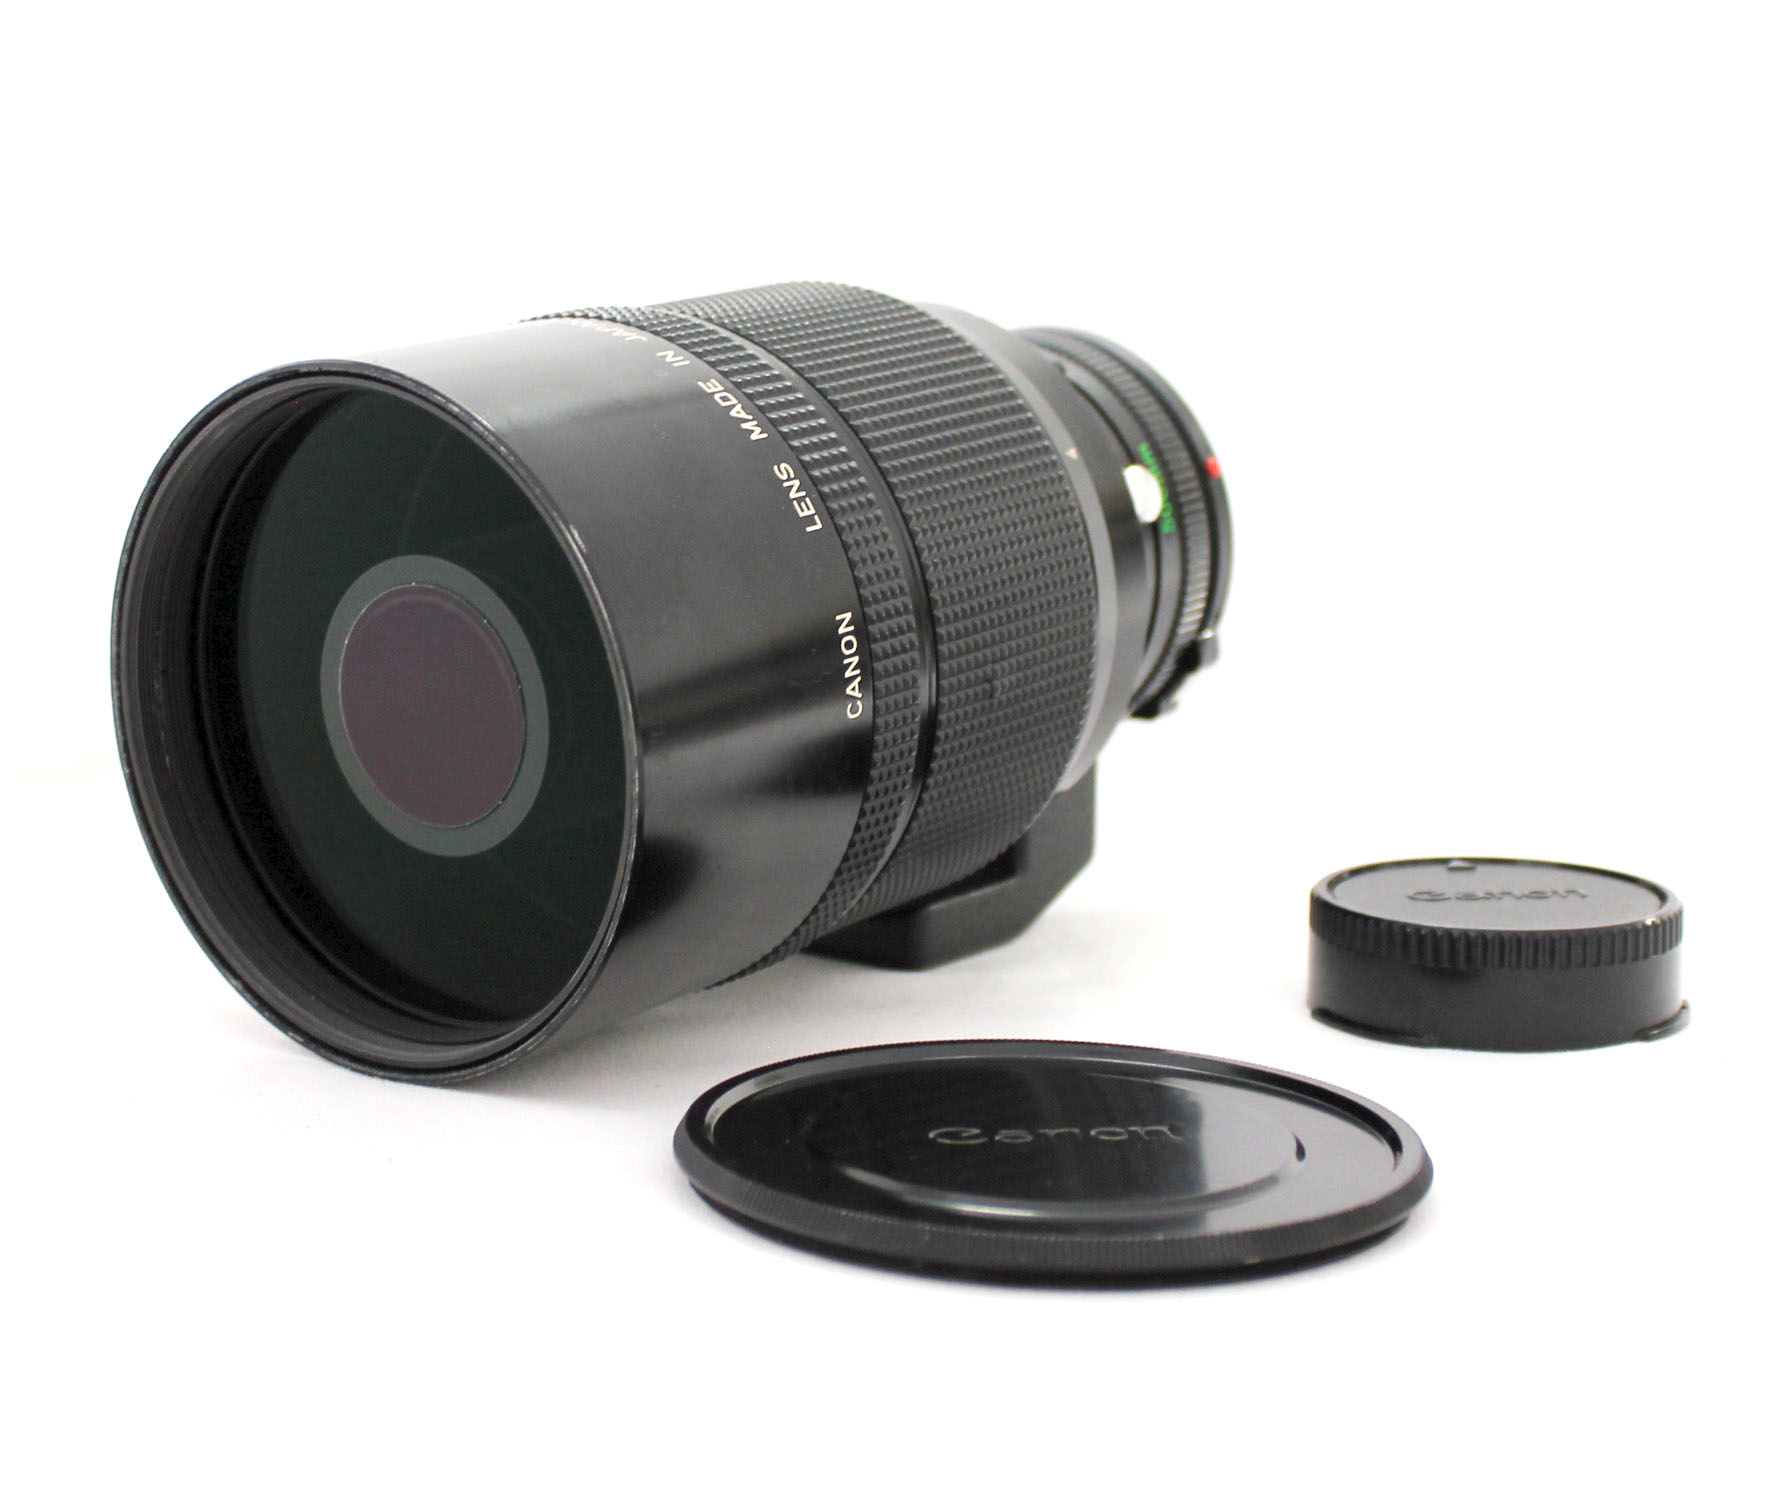 Japan Used Camera Shop | [Excellent+++++] Canon New FD NFD Reflex 500mm F/8 MF Mirror Telephoto Lens from Japan